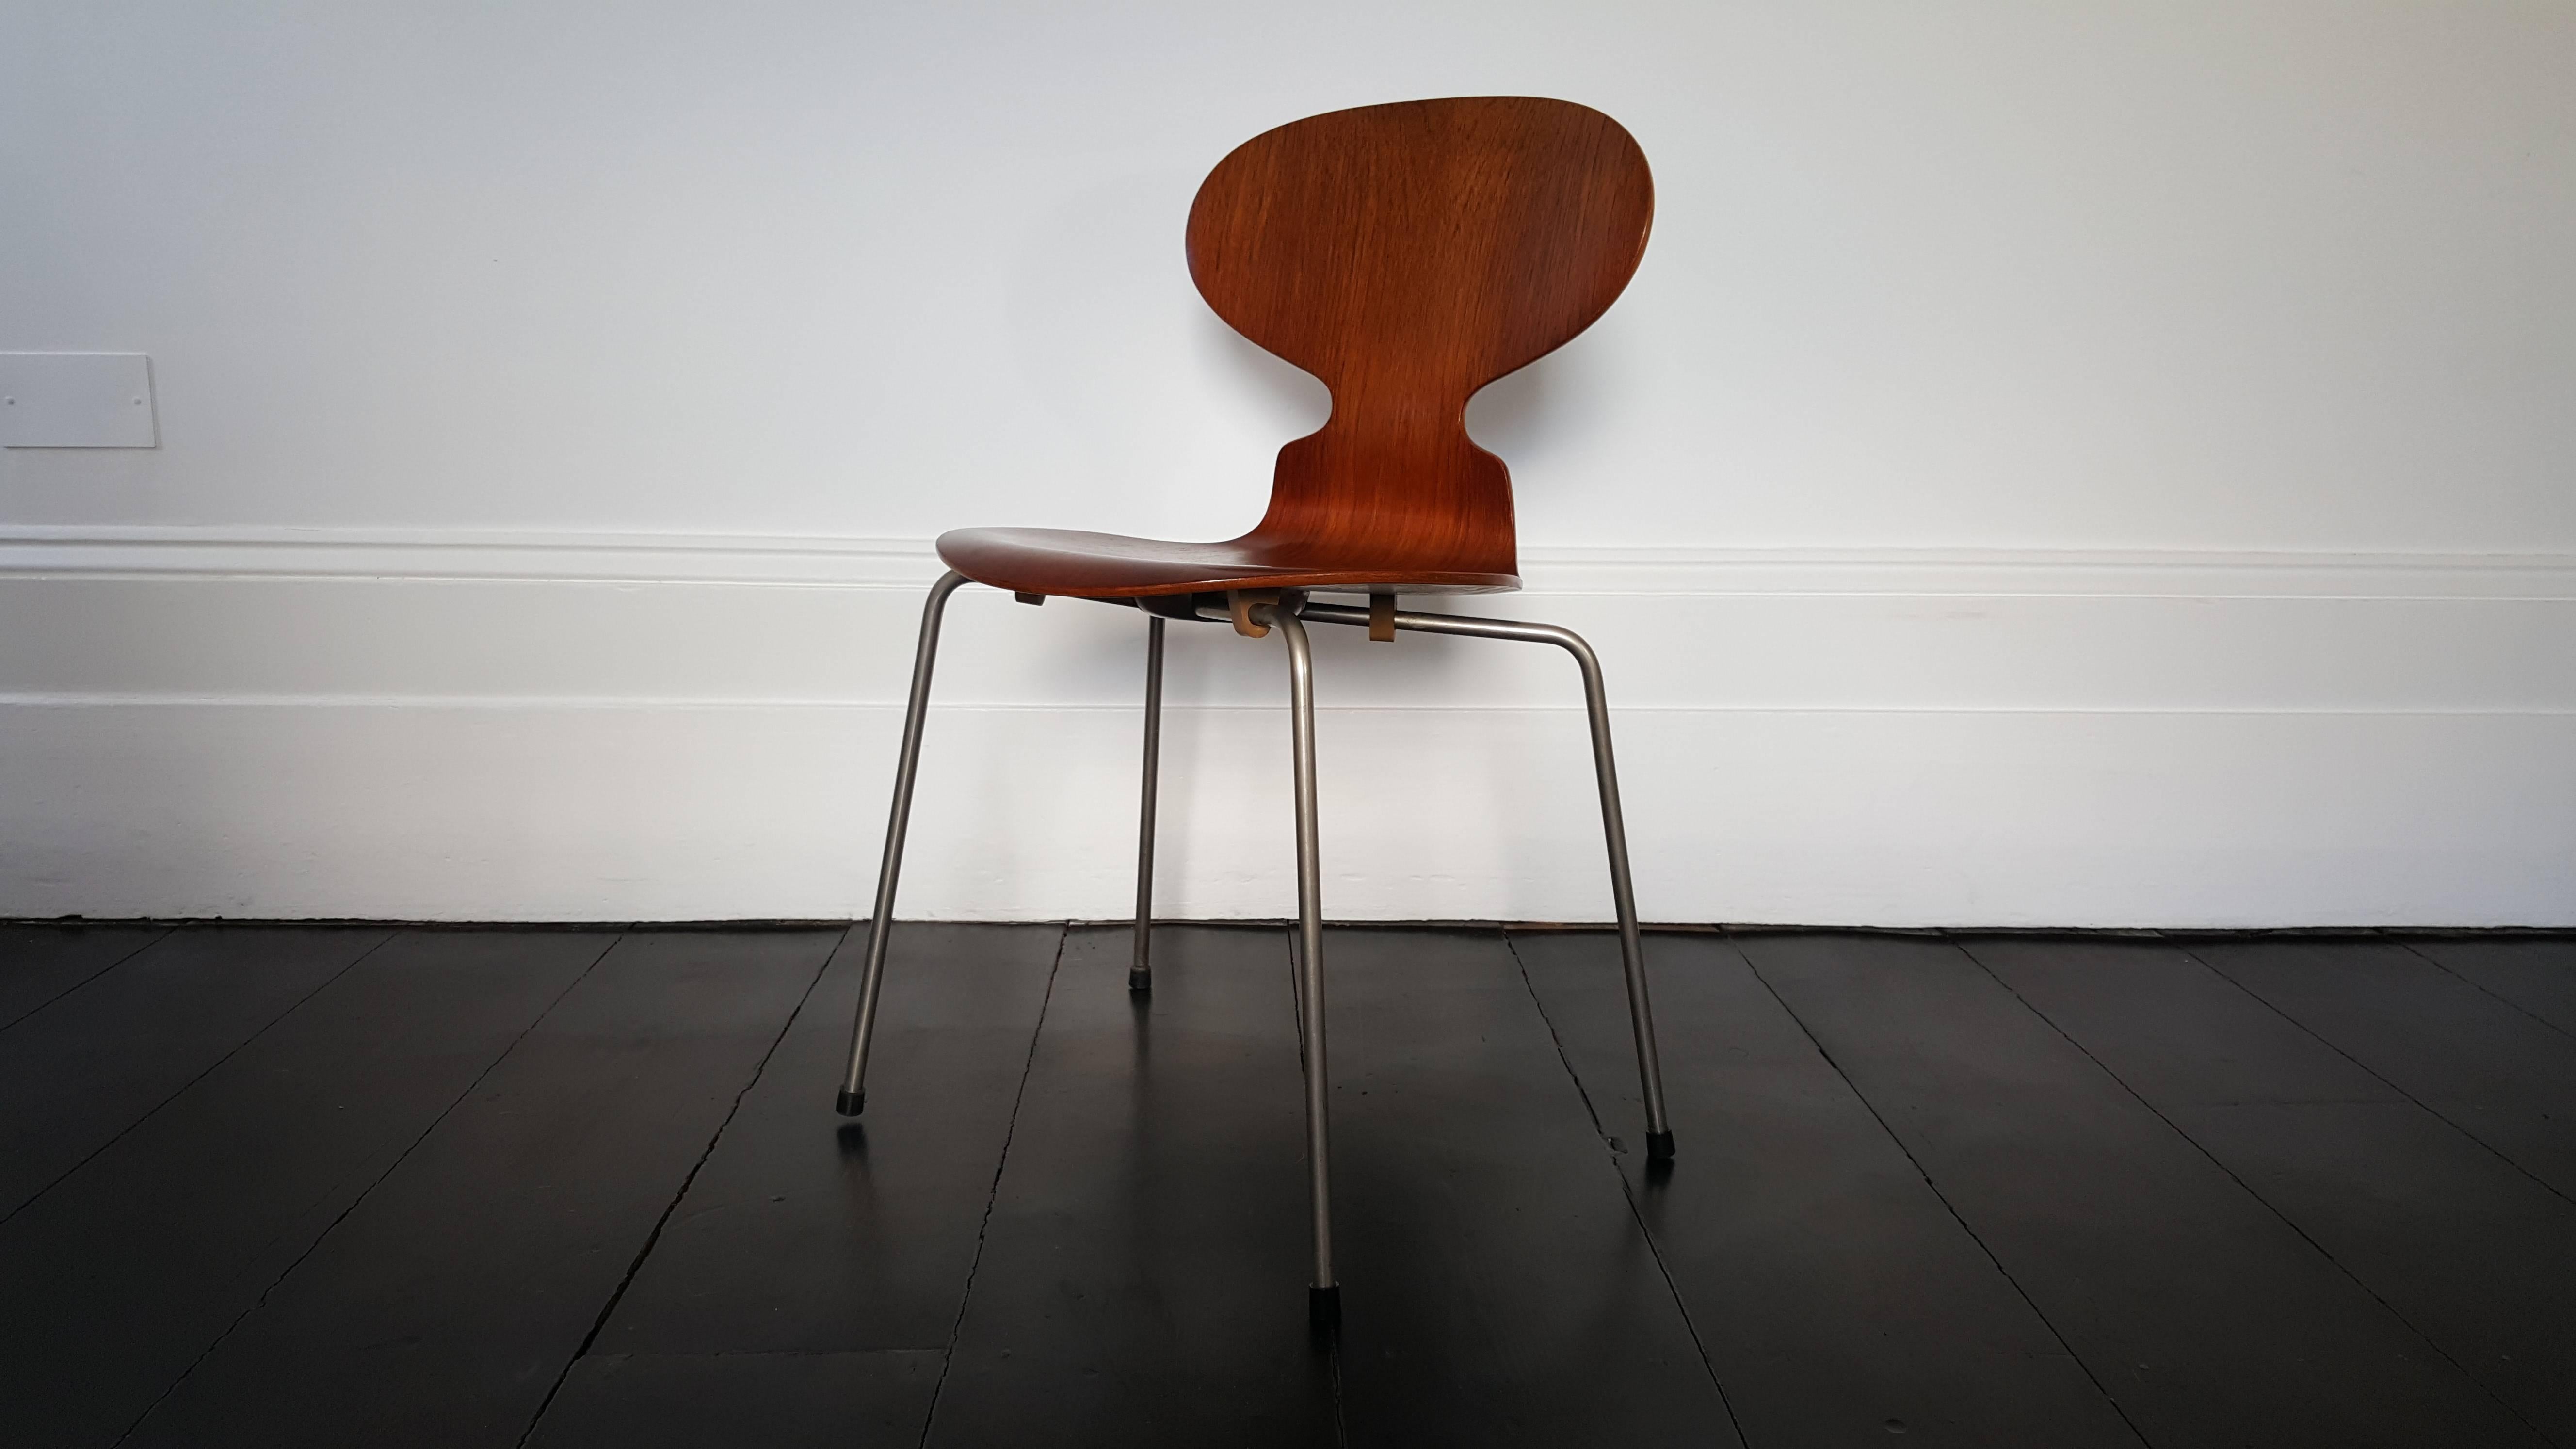 Iconic model 3100 'Ant' chair by Arne Jacobsen for Fritz Hansen.

Model 3100 'Ant' chairs were designed by Arne Jacobsen in 1952. Teak veneer on steel frame.

Global shipping available please contact to discuss.